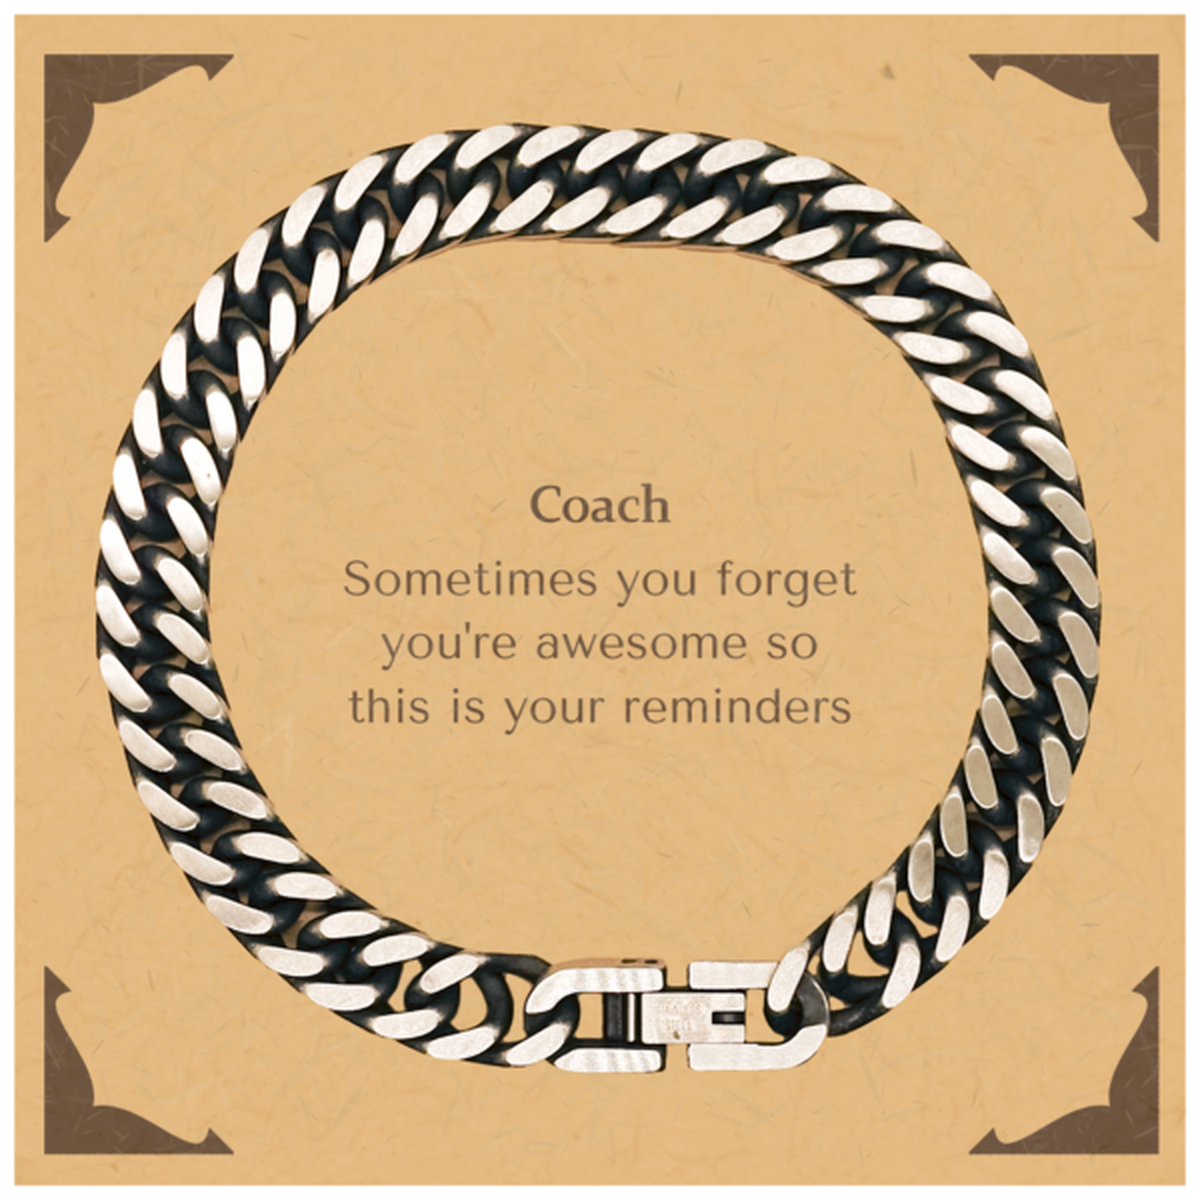 Sentimental Coach Cuban Link Chain Bracelet, Coach Sometimes you forget you're awesome so this is your reminders, Graduation Christmas Birthday Gifts for Coach, Men, Women, Coworkers